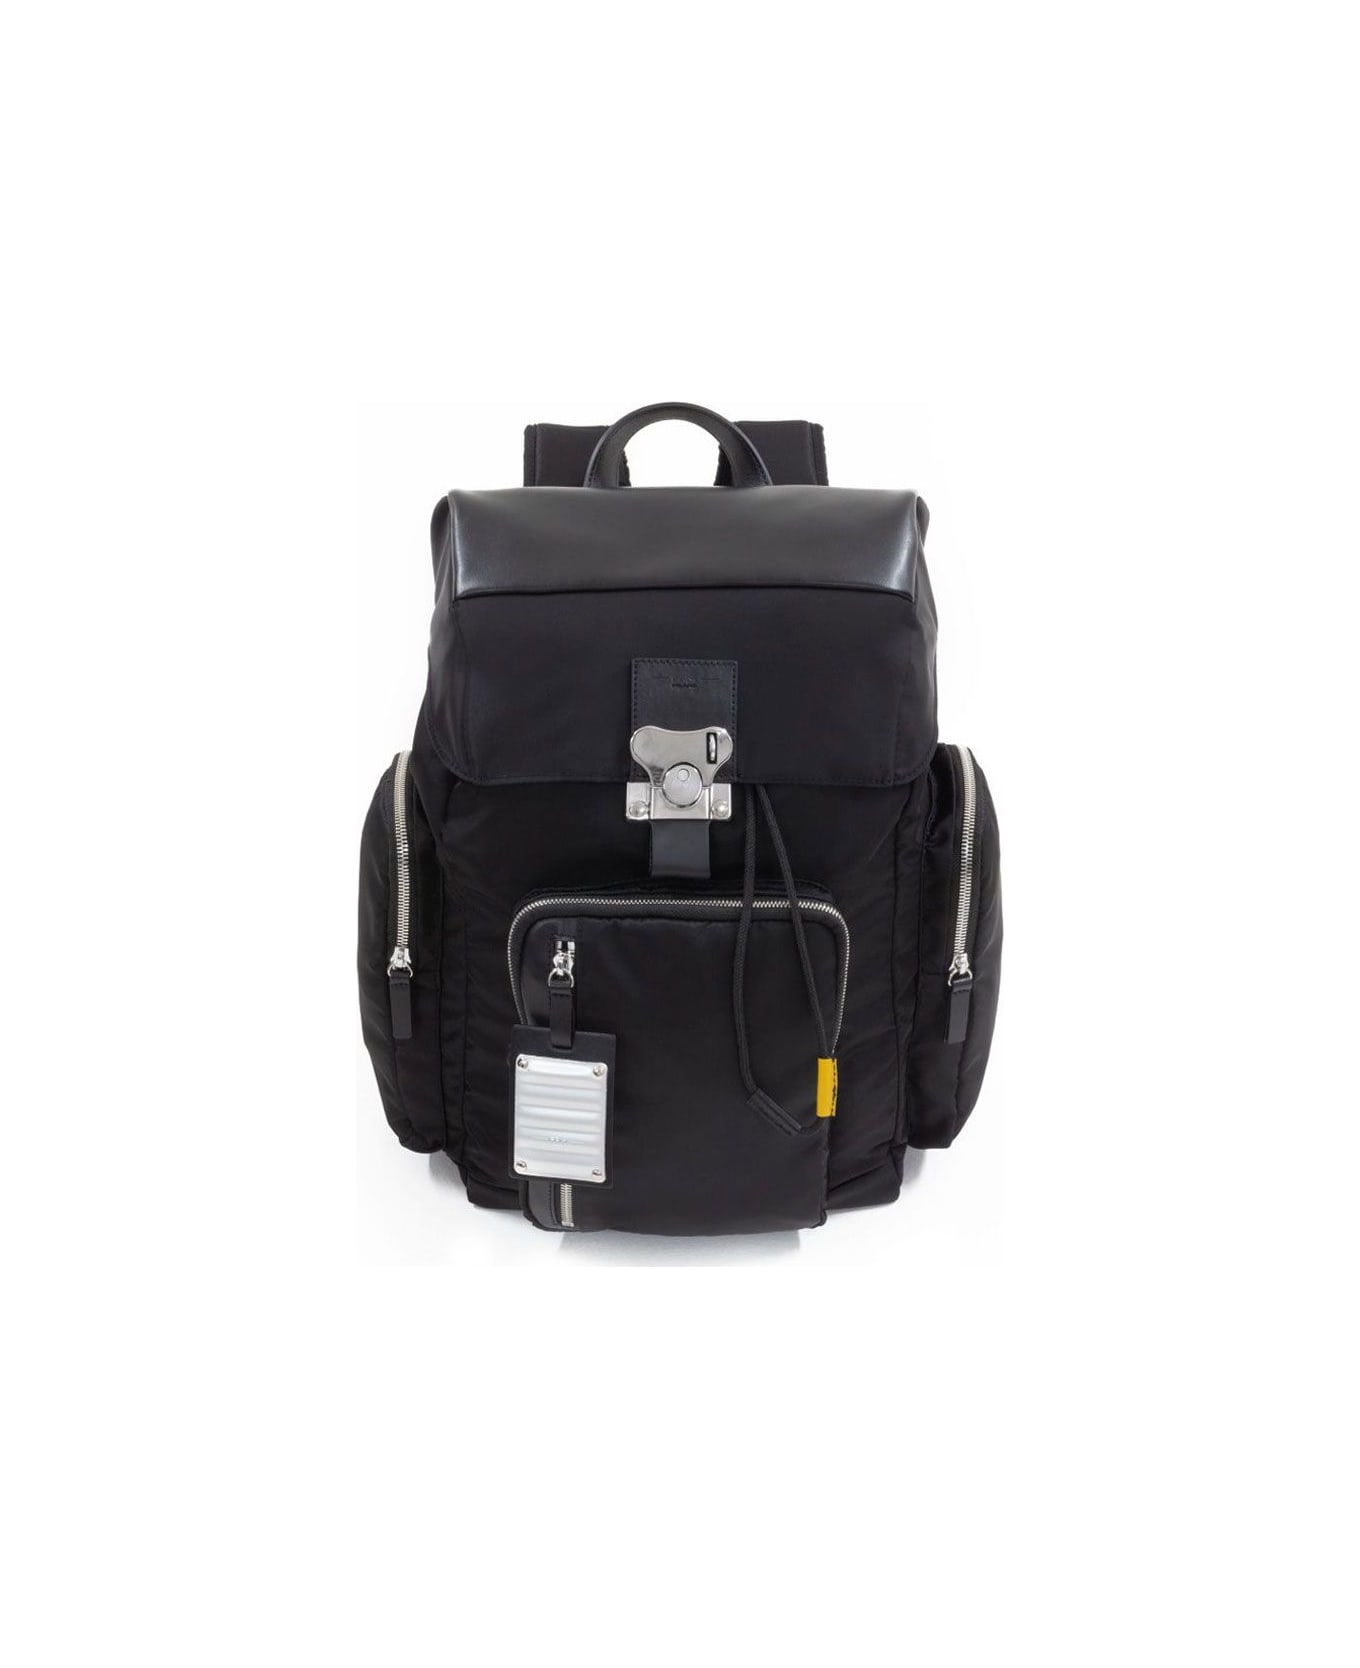 FPM Nylon Bank On The Road-butterfly Pc Backpack M - BLACK